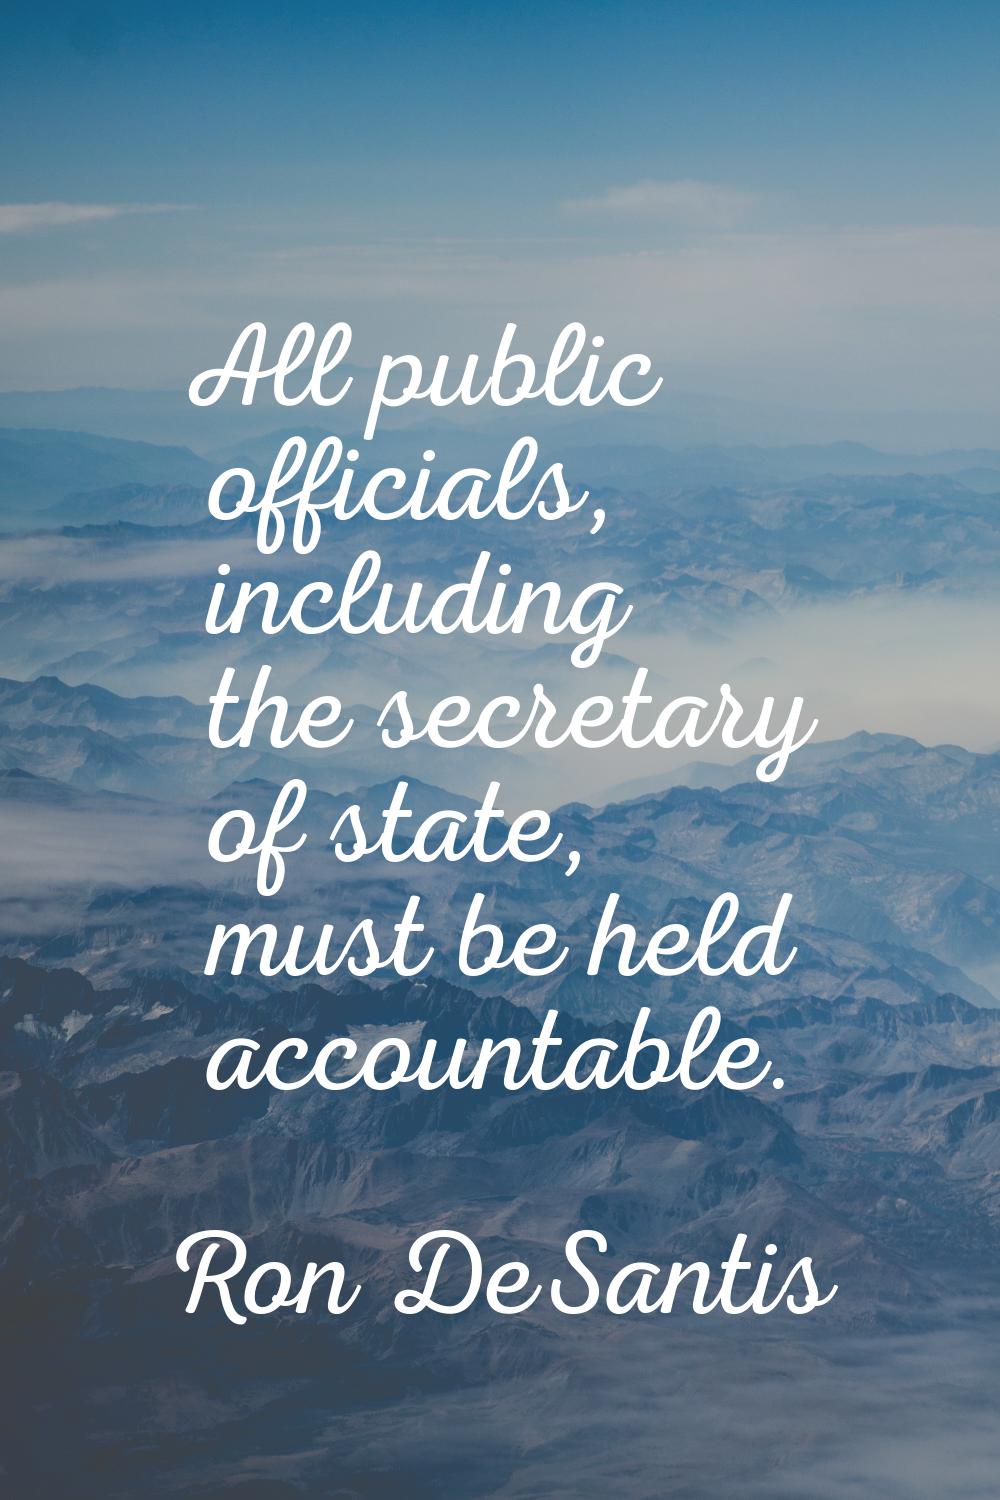 All public officials, including the secretary of state, must be held accountable.